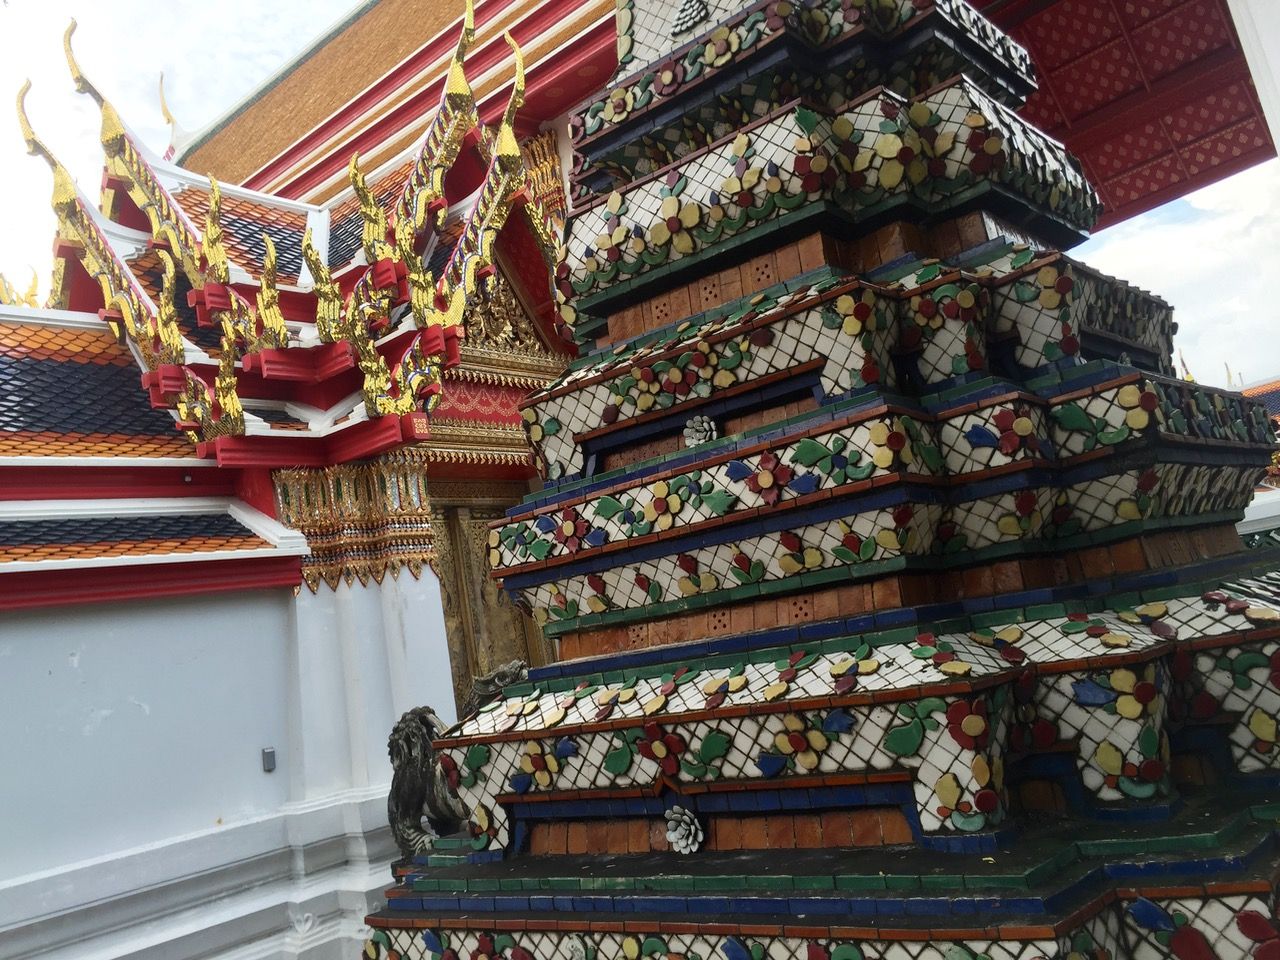 Traditionally decorated Thai Buddhist temple with a ceramic tower next to it.